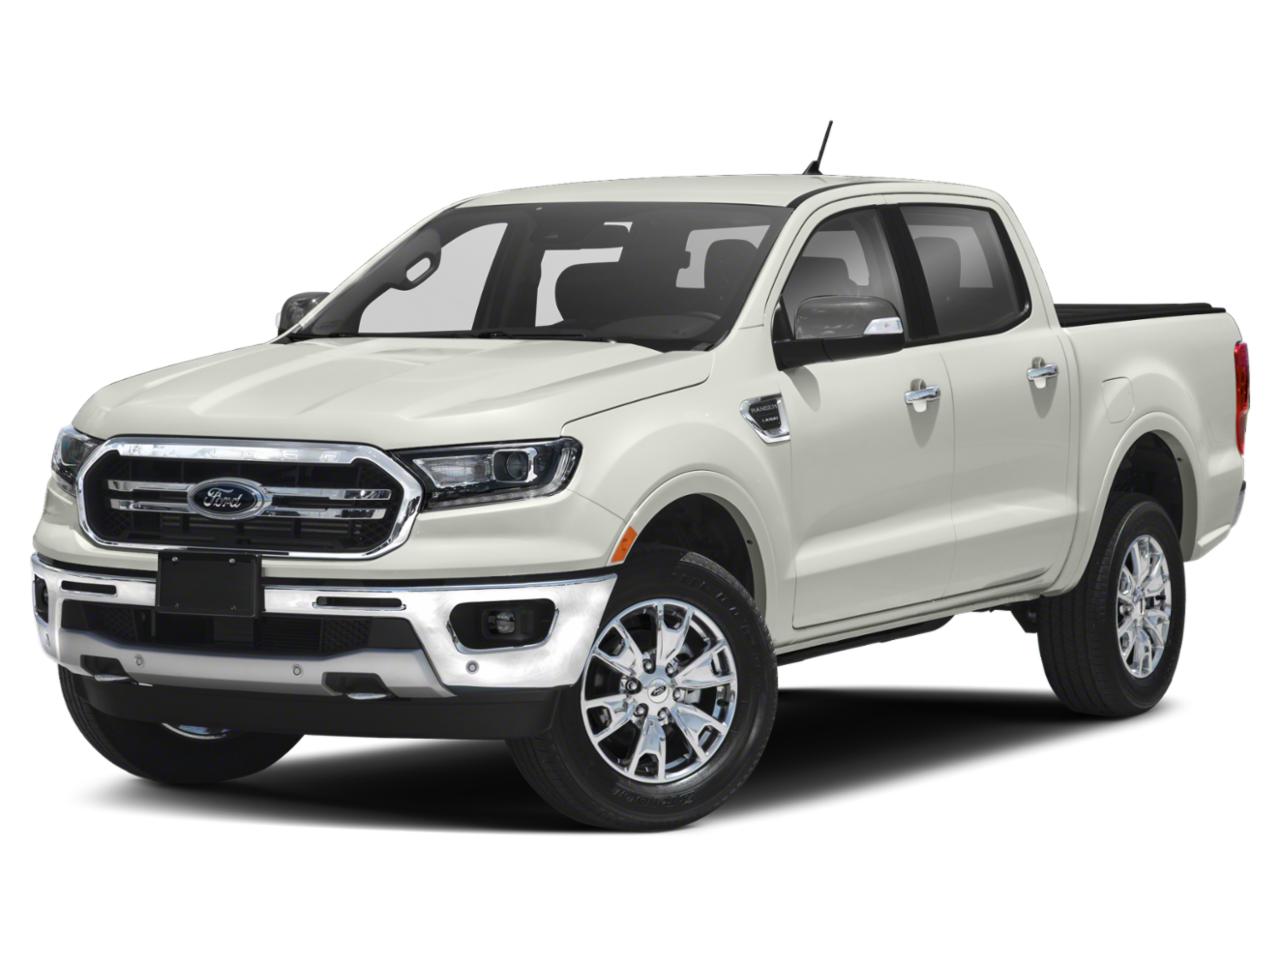 2020 Ford Ranger Vehicle Photo in Saint Charles, IL 60174